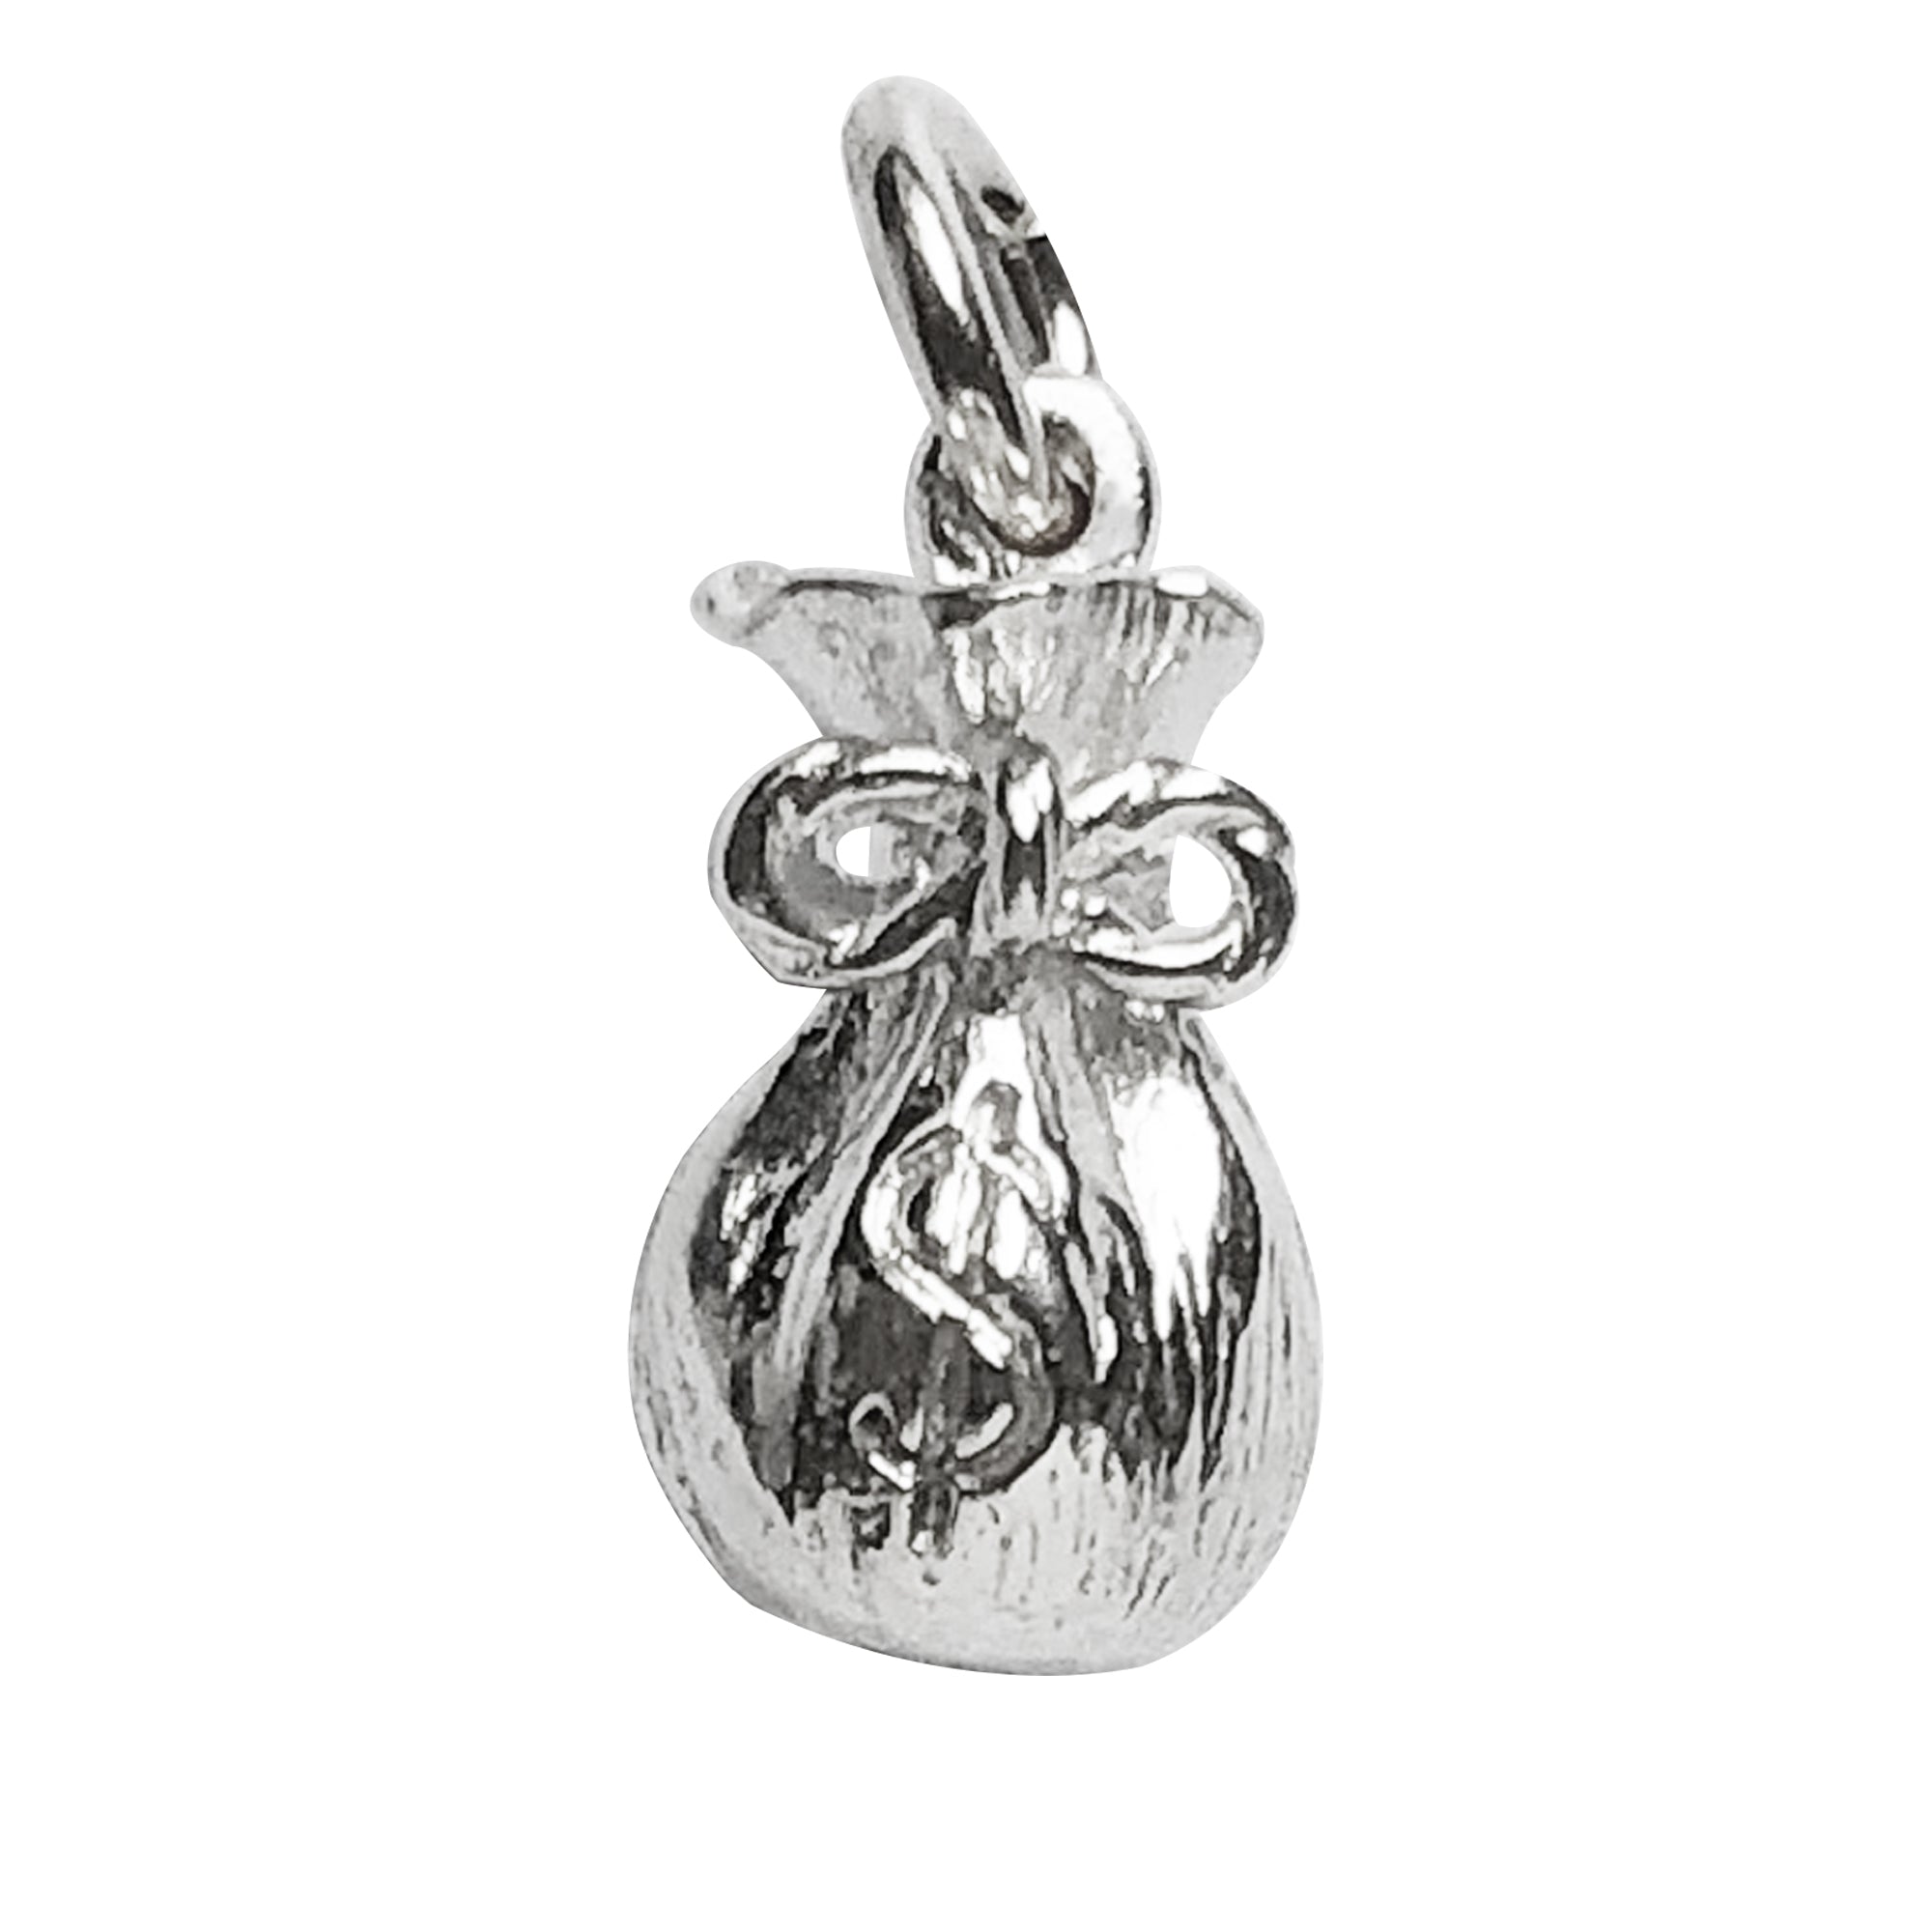 Money Bag Antique Silver Charm, Base Metal Plated in Imitation Rhodium